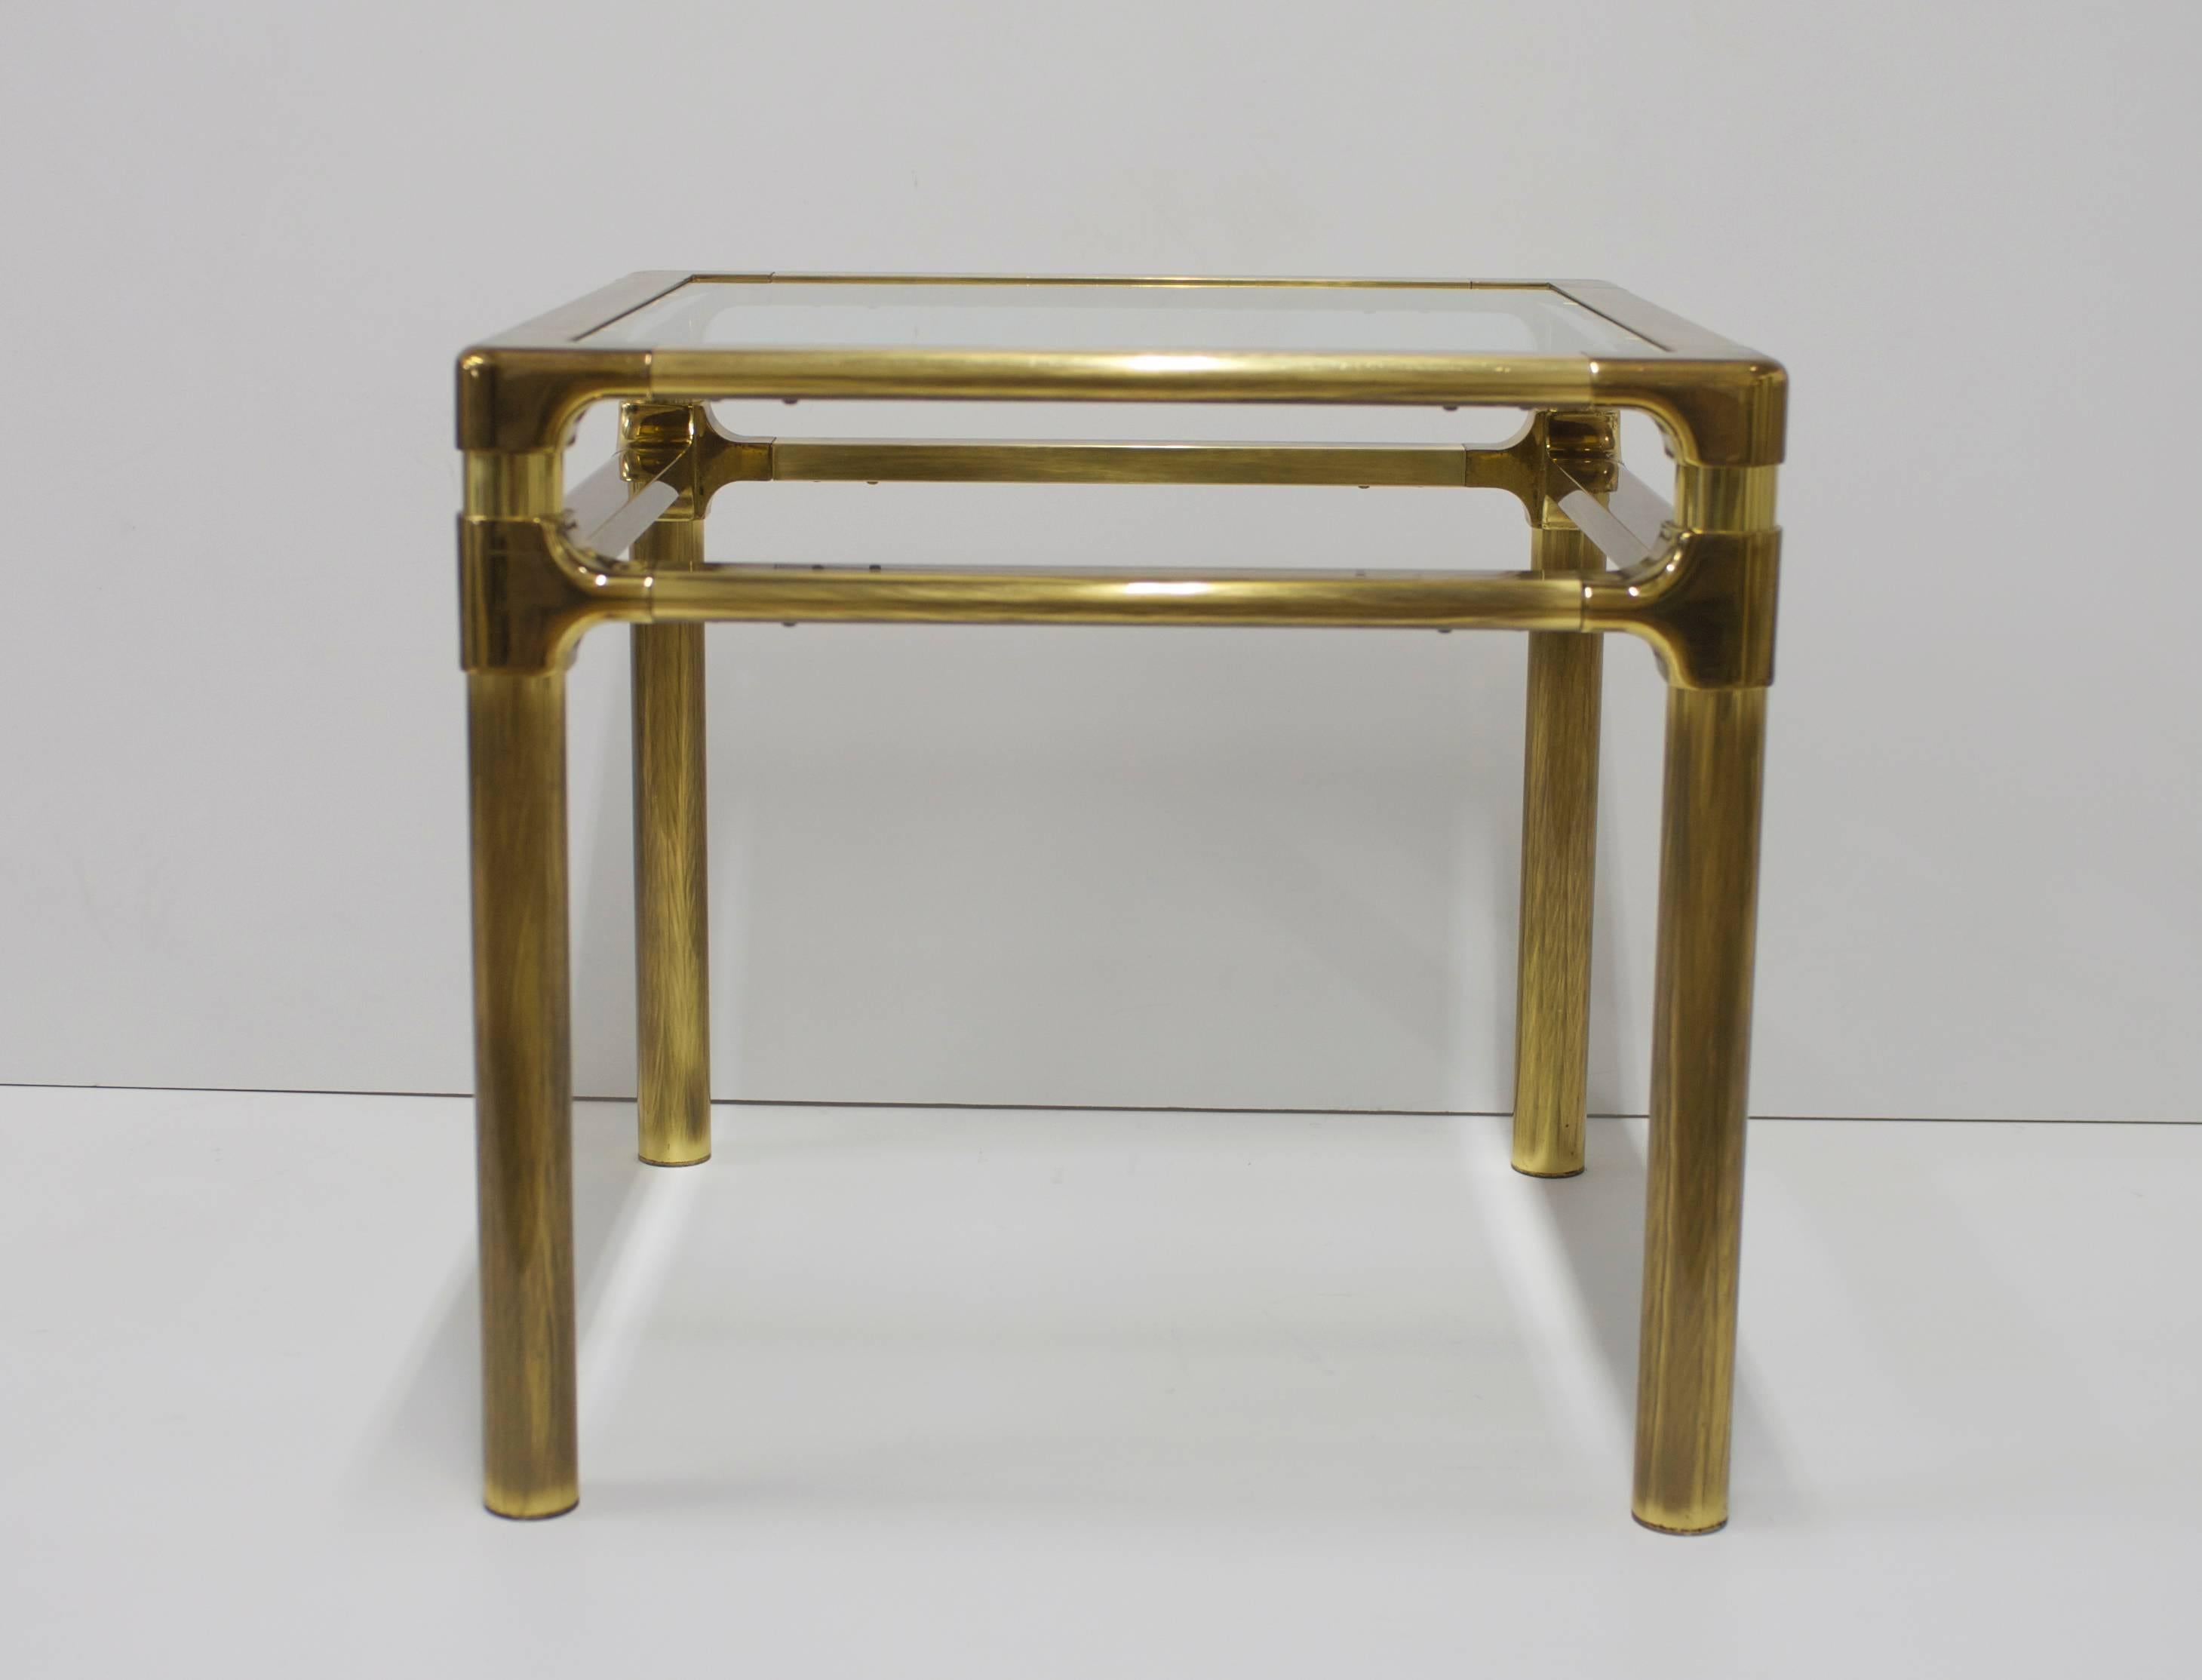 This quality brass side or occasional table has aged to the perfect patina. 
The brass is in excellent vintage condition. The table is substantial and heavy, a quality made piece. The beveled glass is new so is in excellent condition.  